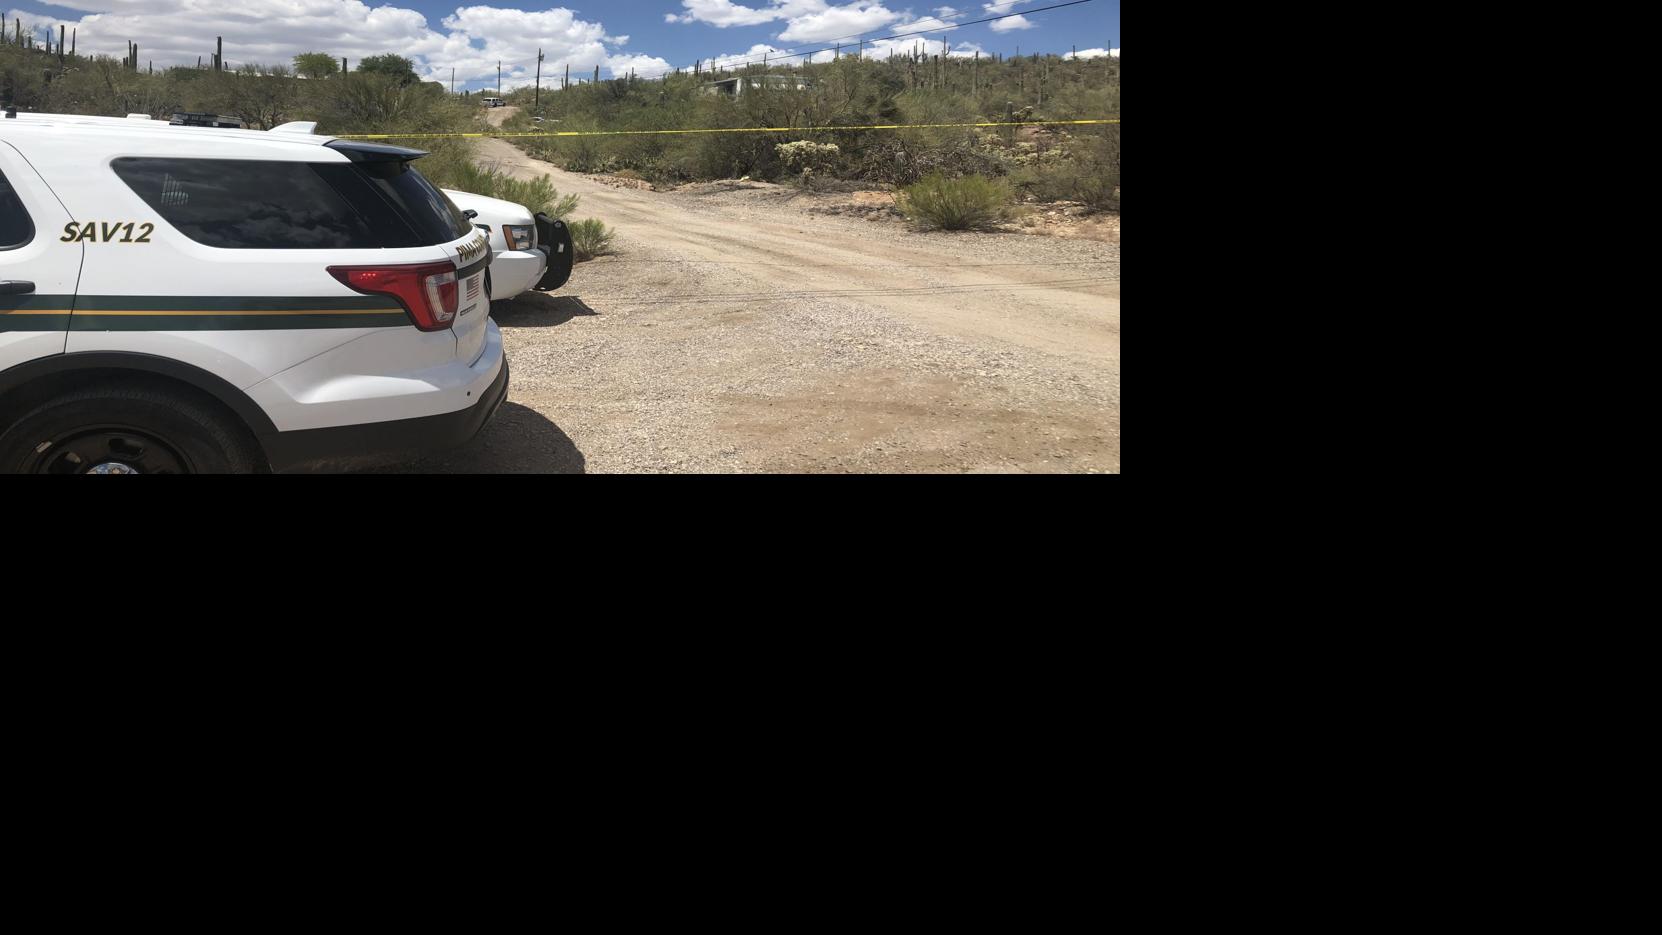 Detectives ID body found in suspicious death on Tucson's southwest side